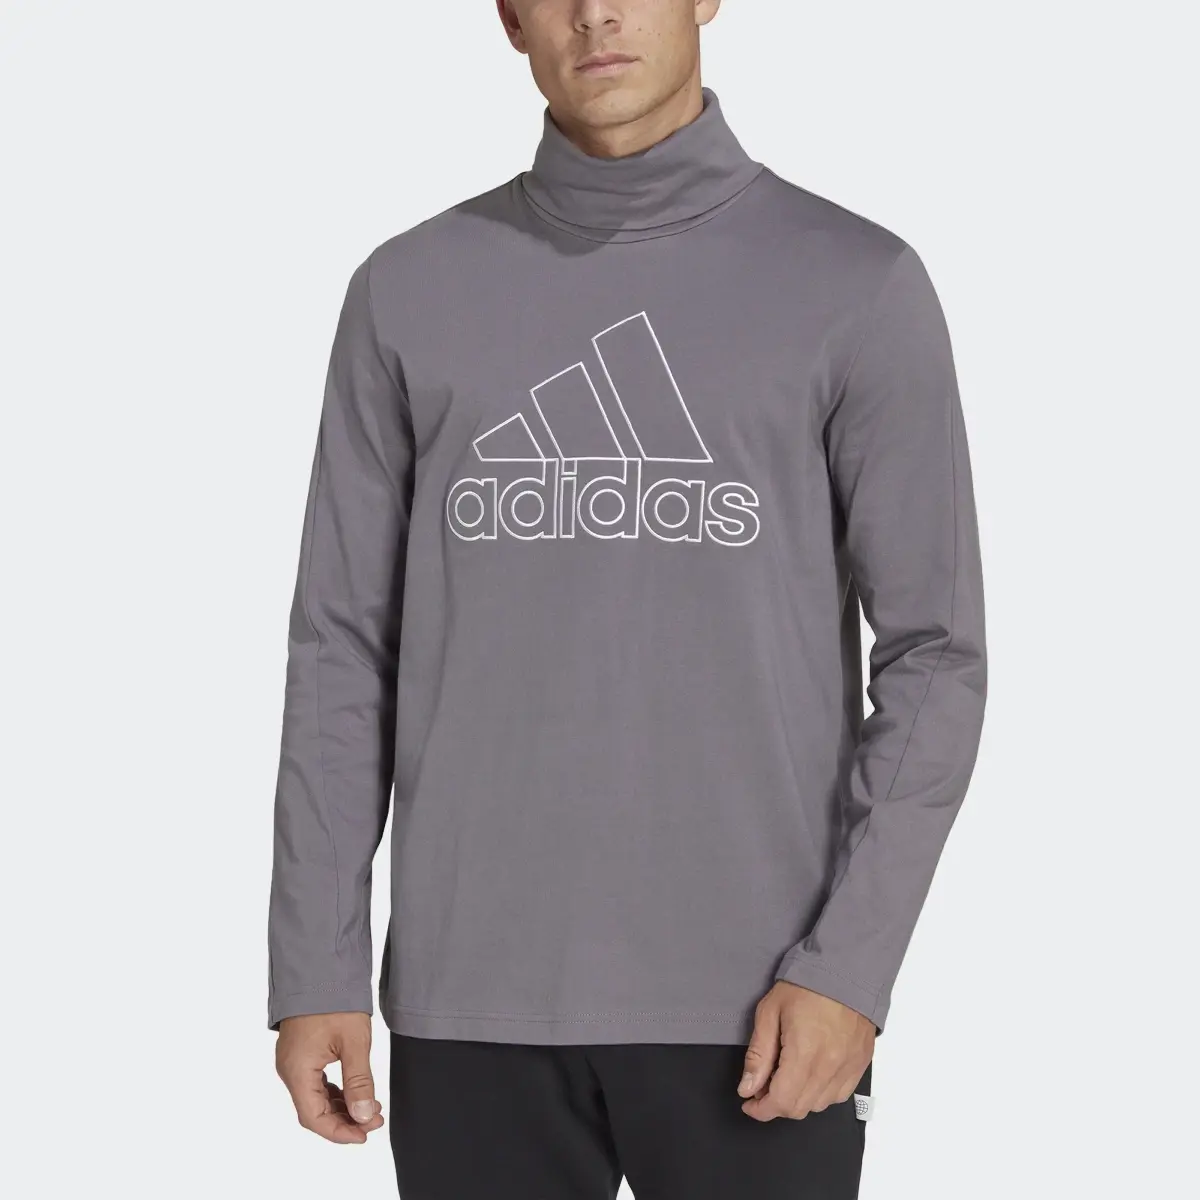 Adidas Future Icons Embroidered Badge of Sport Long-Sleeve Top. 1